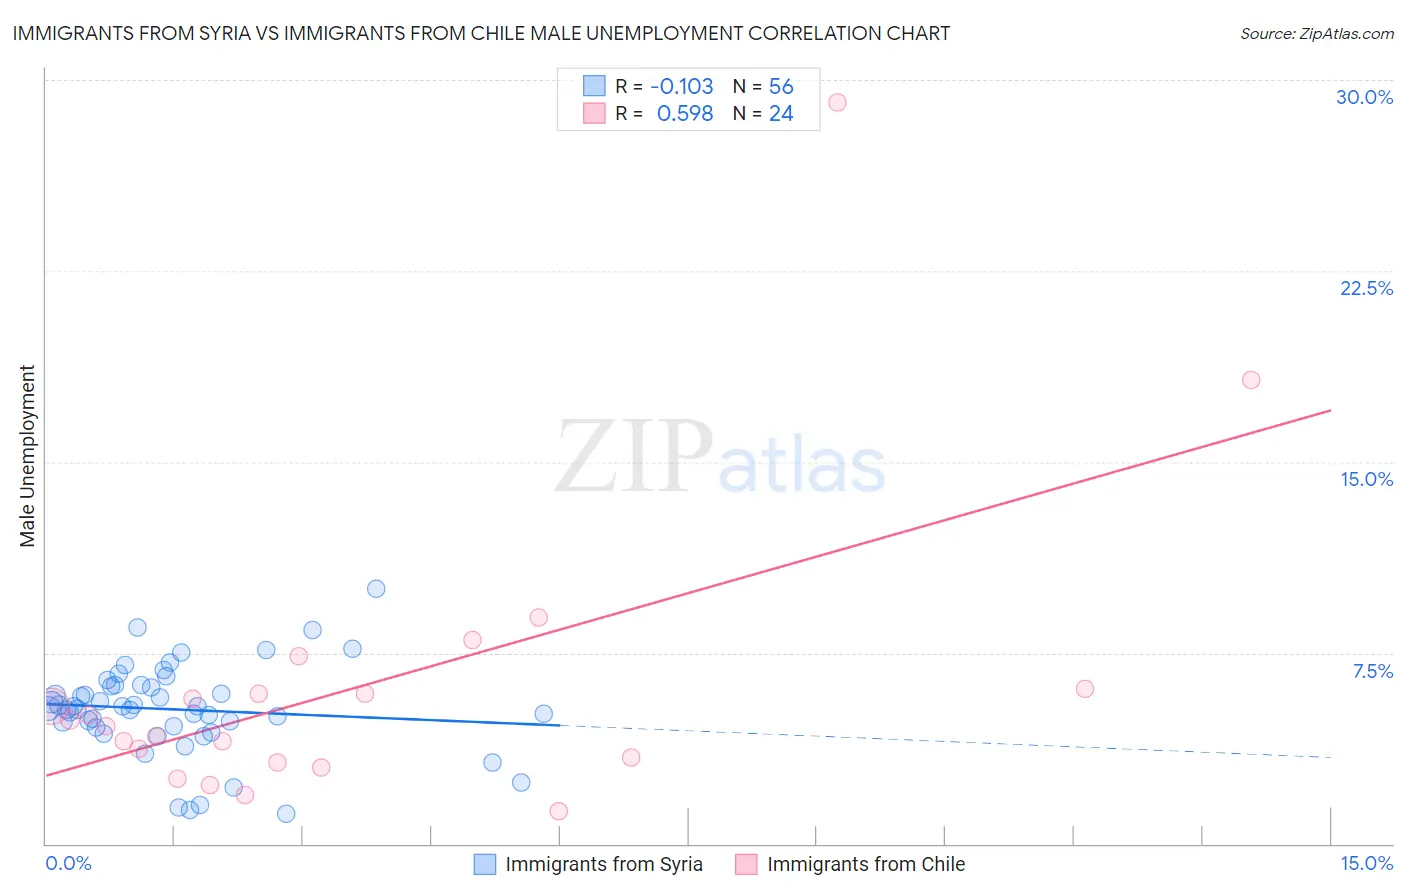 Immigrants from Syria vs Immigrants from Chile Male Unemployment